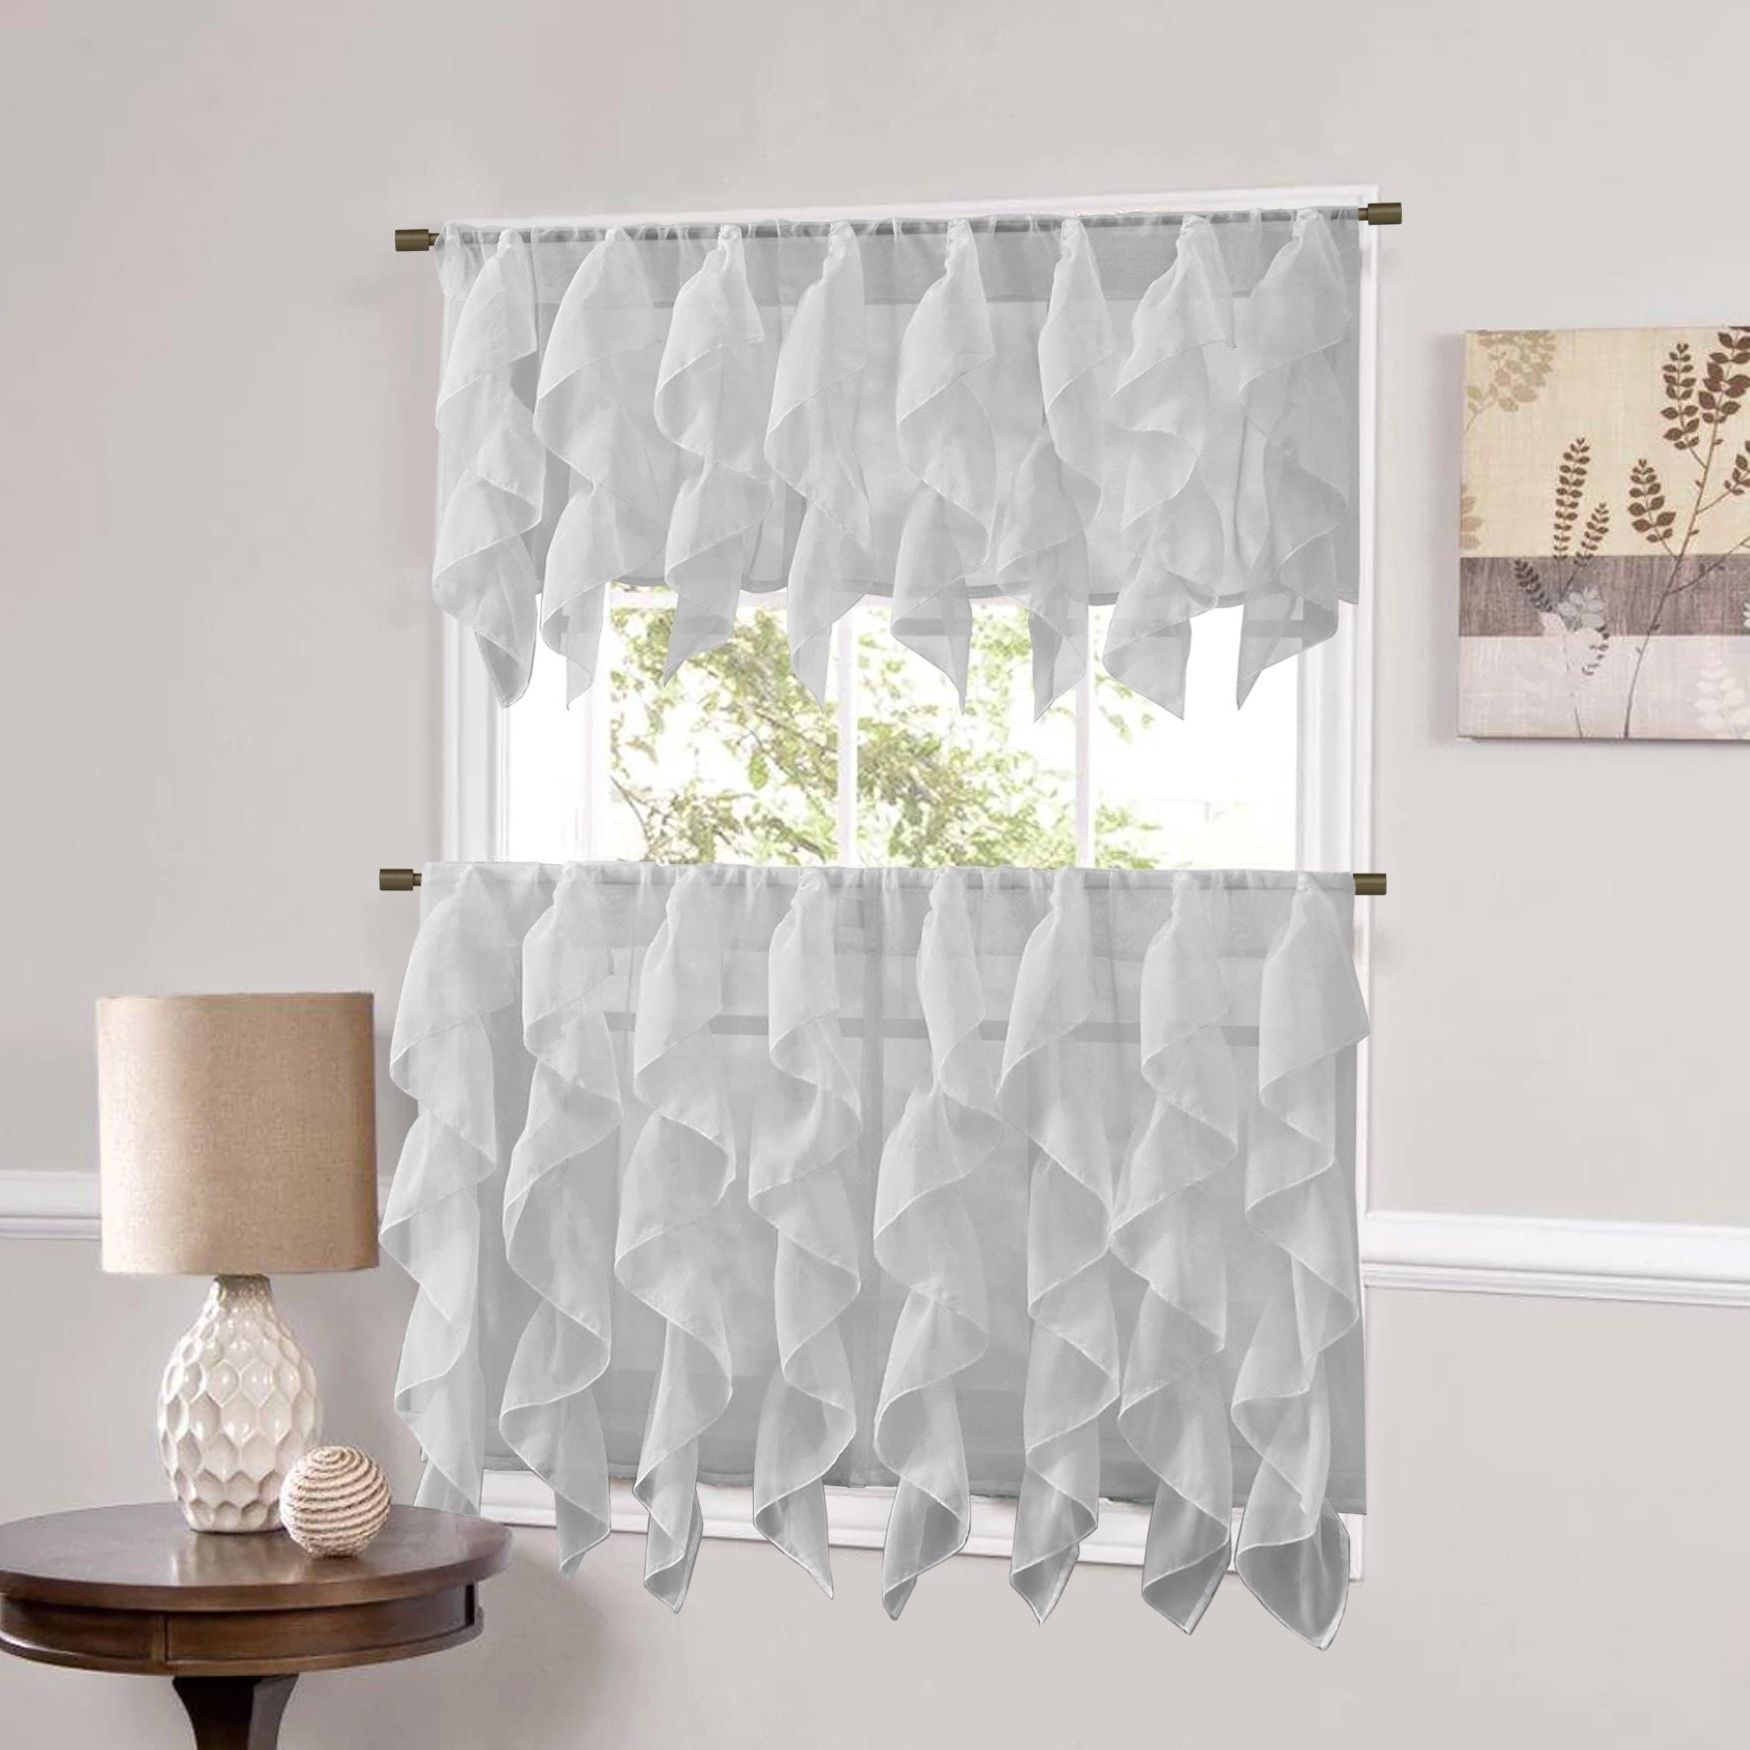 Navy Vertical Ruffled Waterfall Valance And Curtain Tiers Inside Well Known Sweet Home Collection Silver Vertical Ruffled Waterfall Valance And Curtain  Tiers (View 3 of 20)